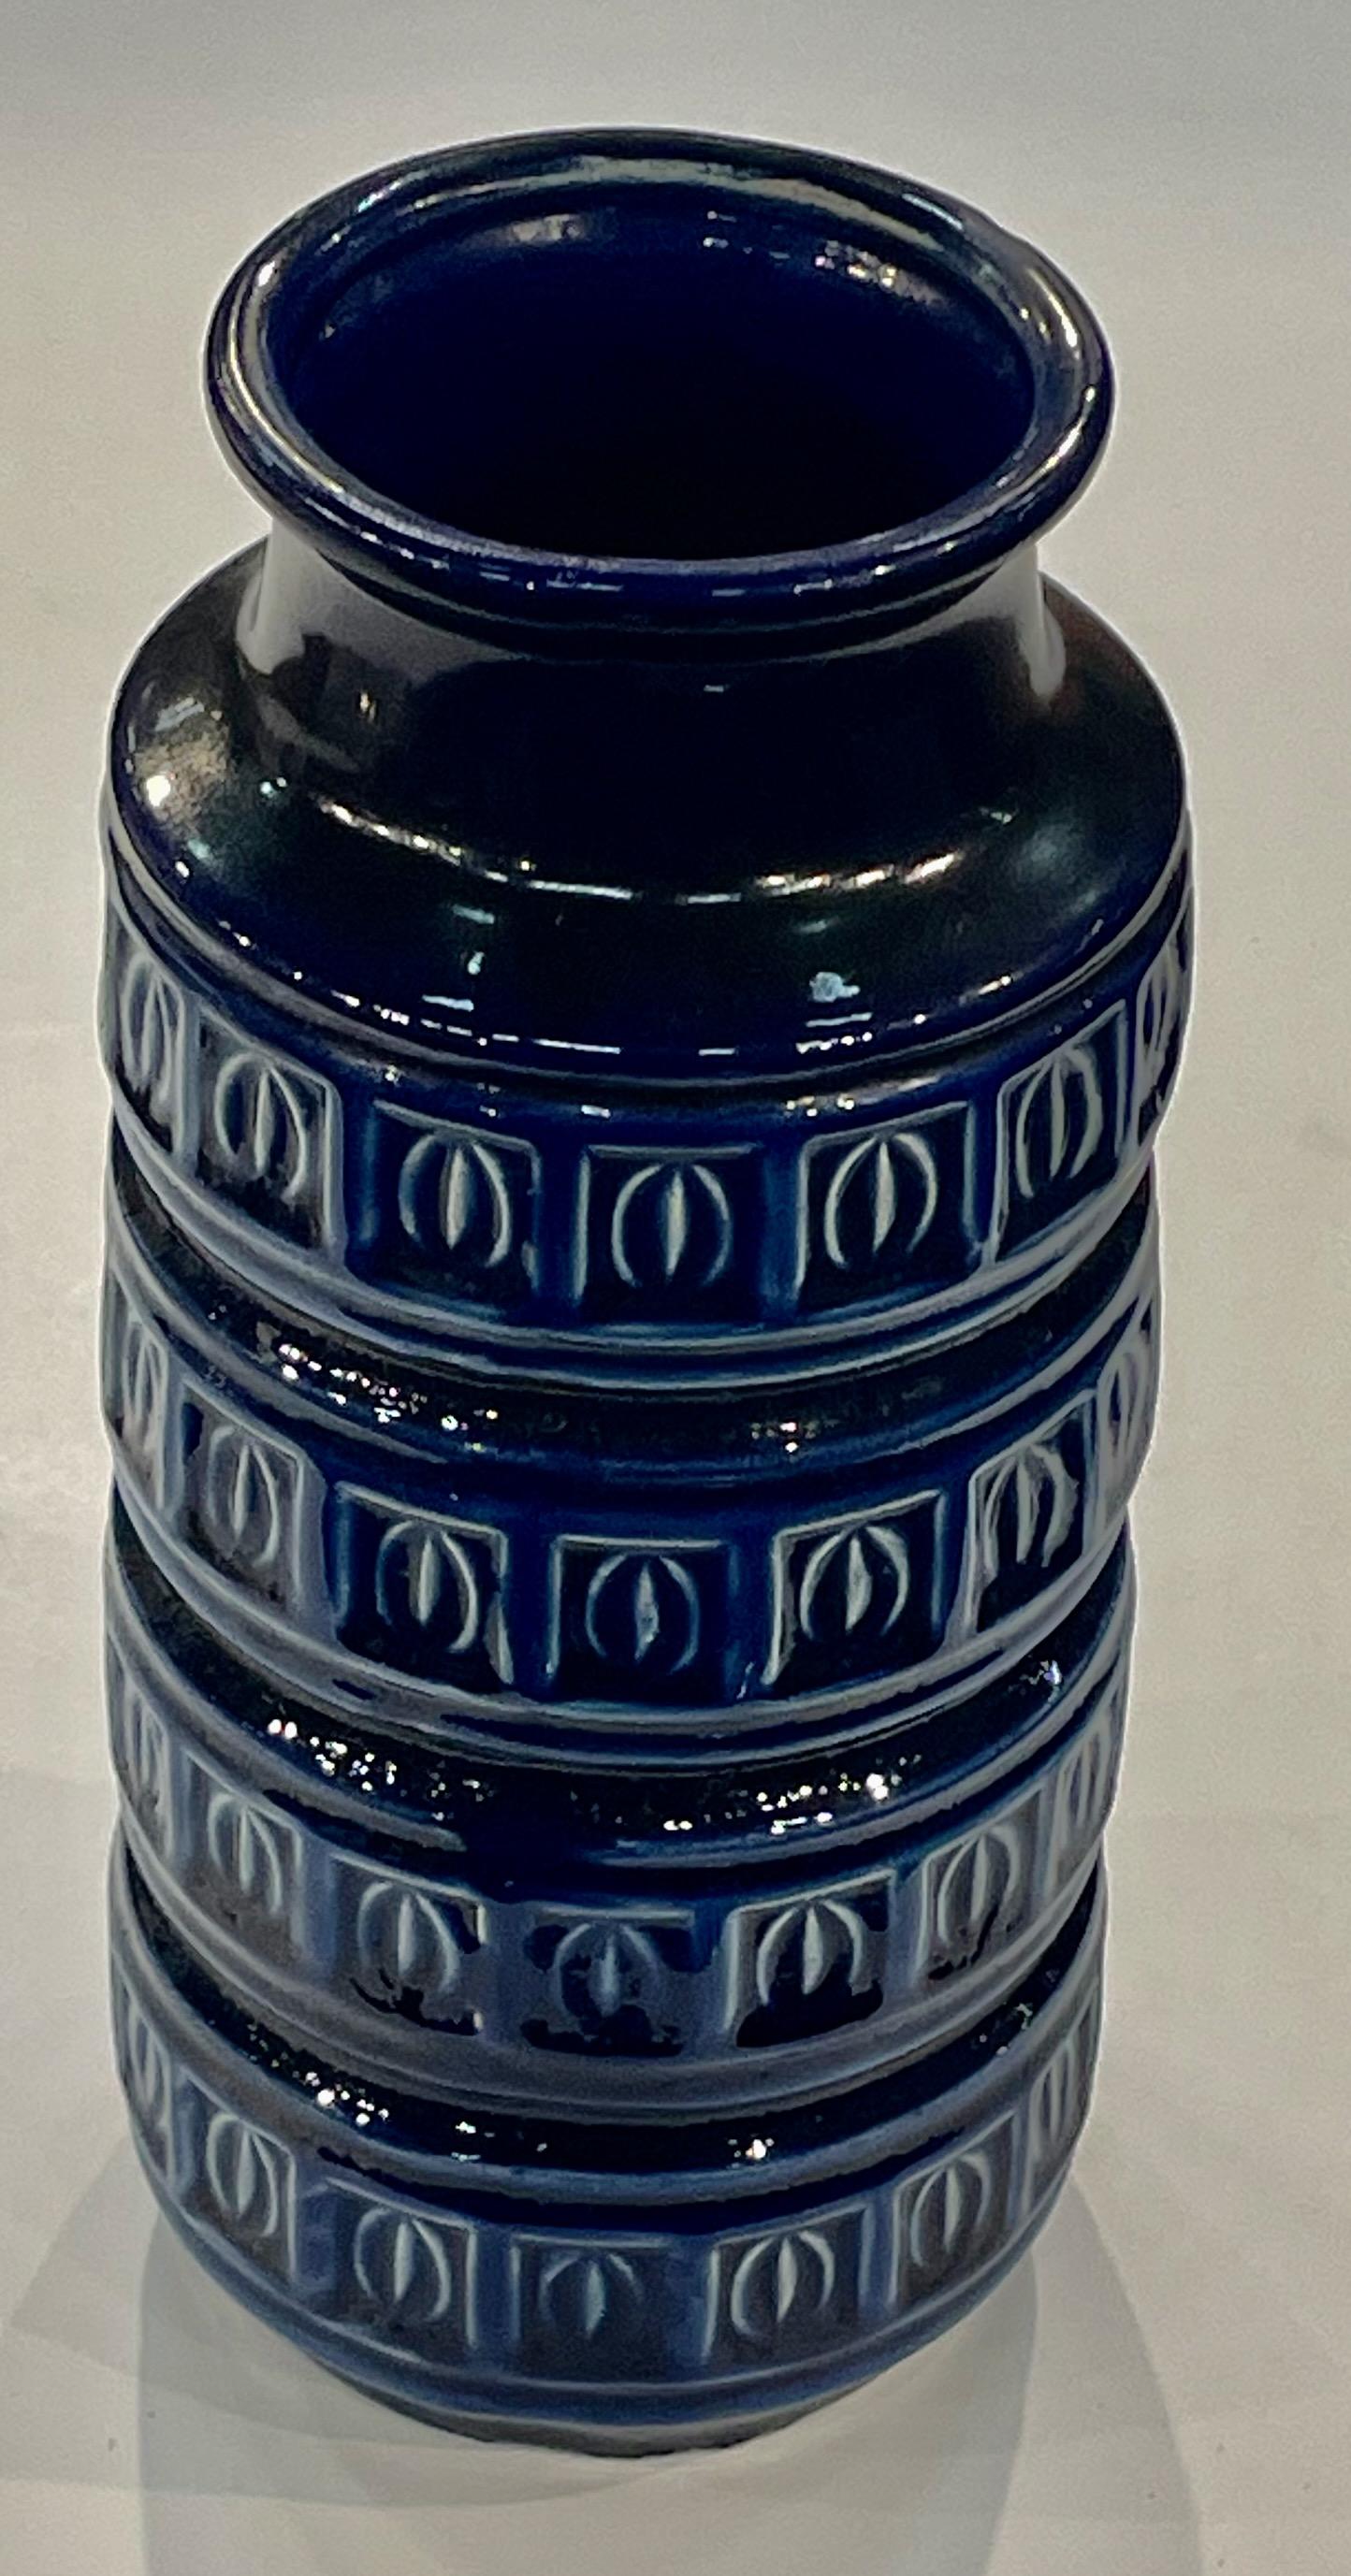 Mid Century German ceramic vase with horizontal bands of raised geometric design.
Cobalt blue in color.
Can hold water.
Sits well with S6757.
